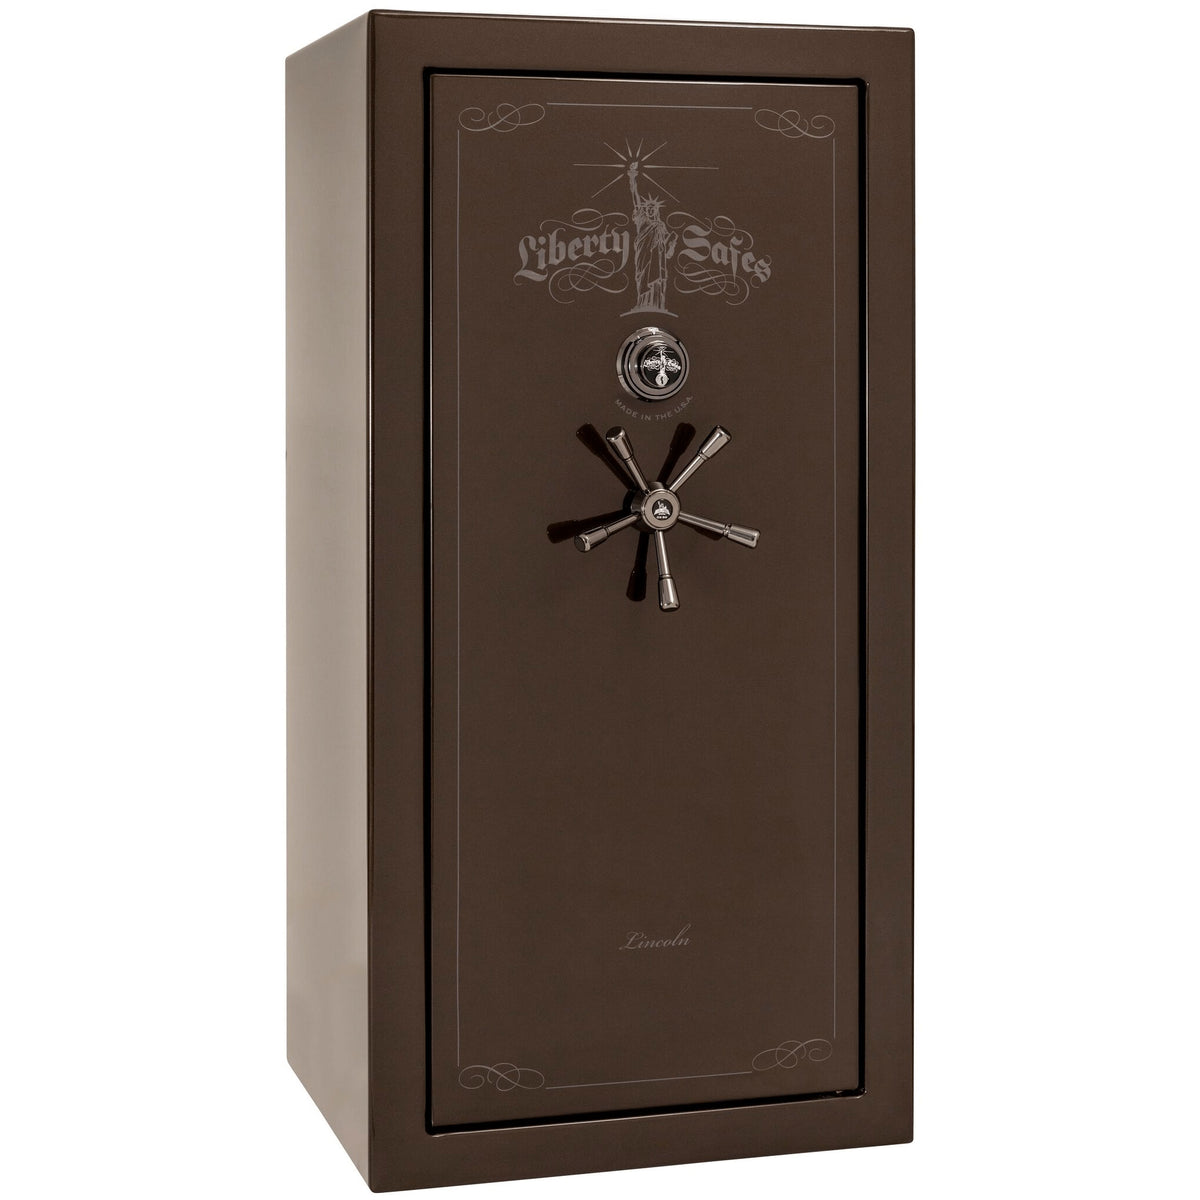 Liberty Lincoln 25 Safe in Bronze Gloss with Black Chrome Mechanical Lock.